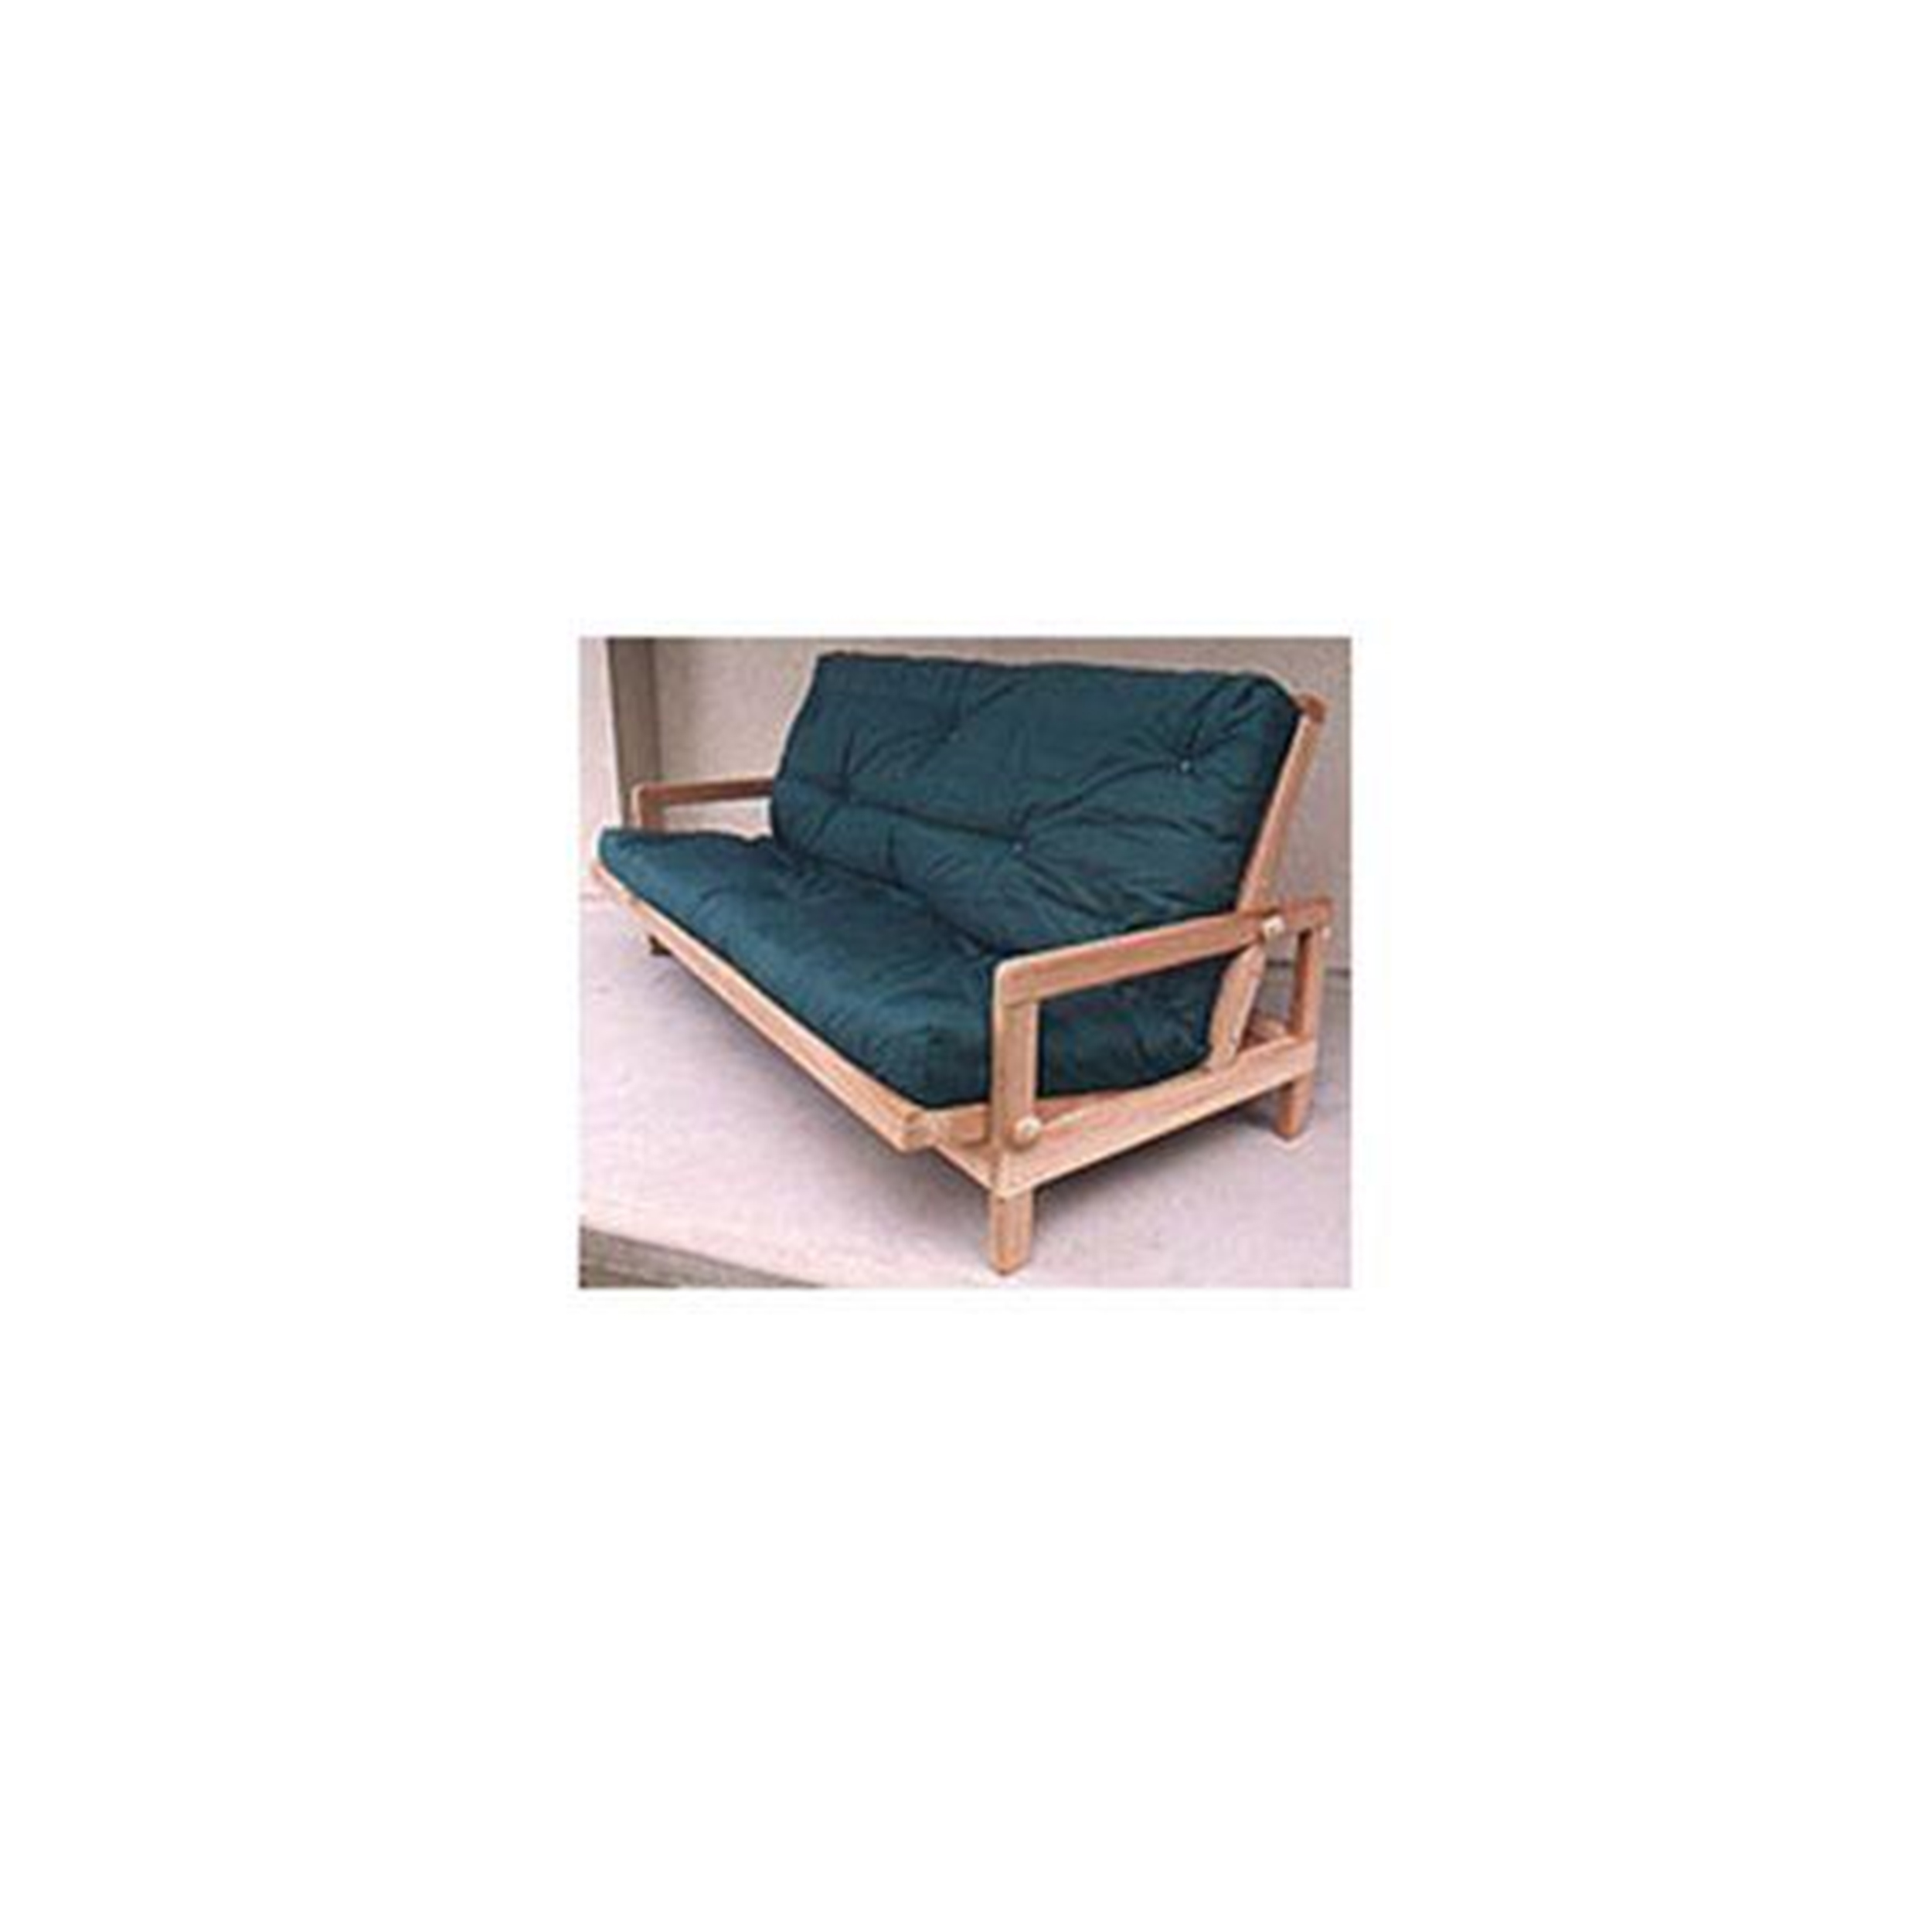 Woodworking Project Paper Plan To Build Futon Sofa